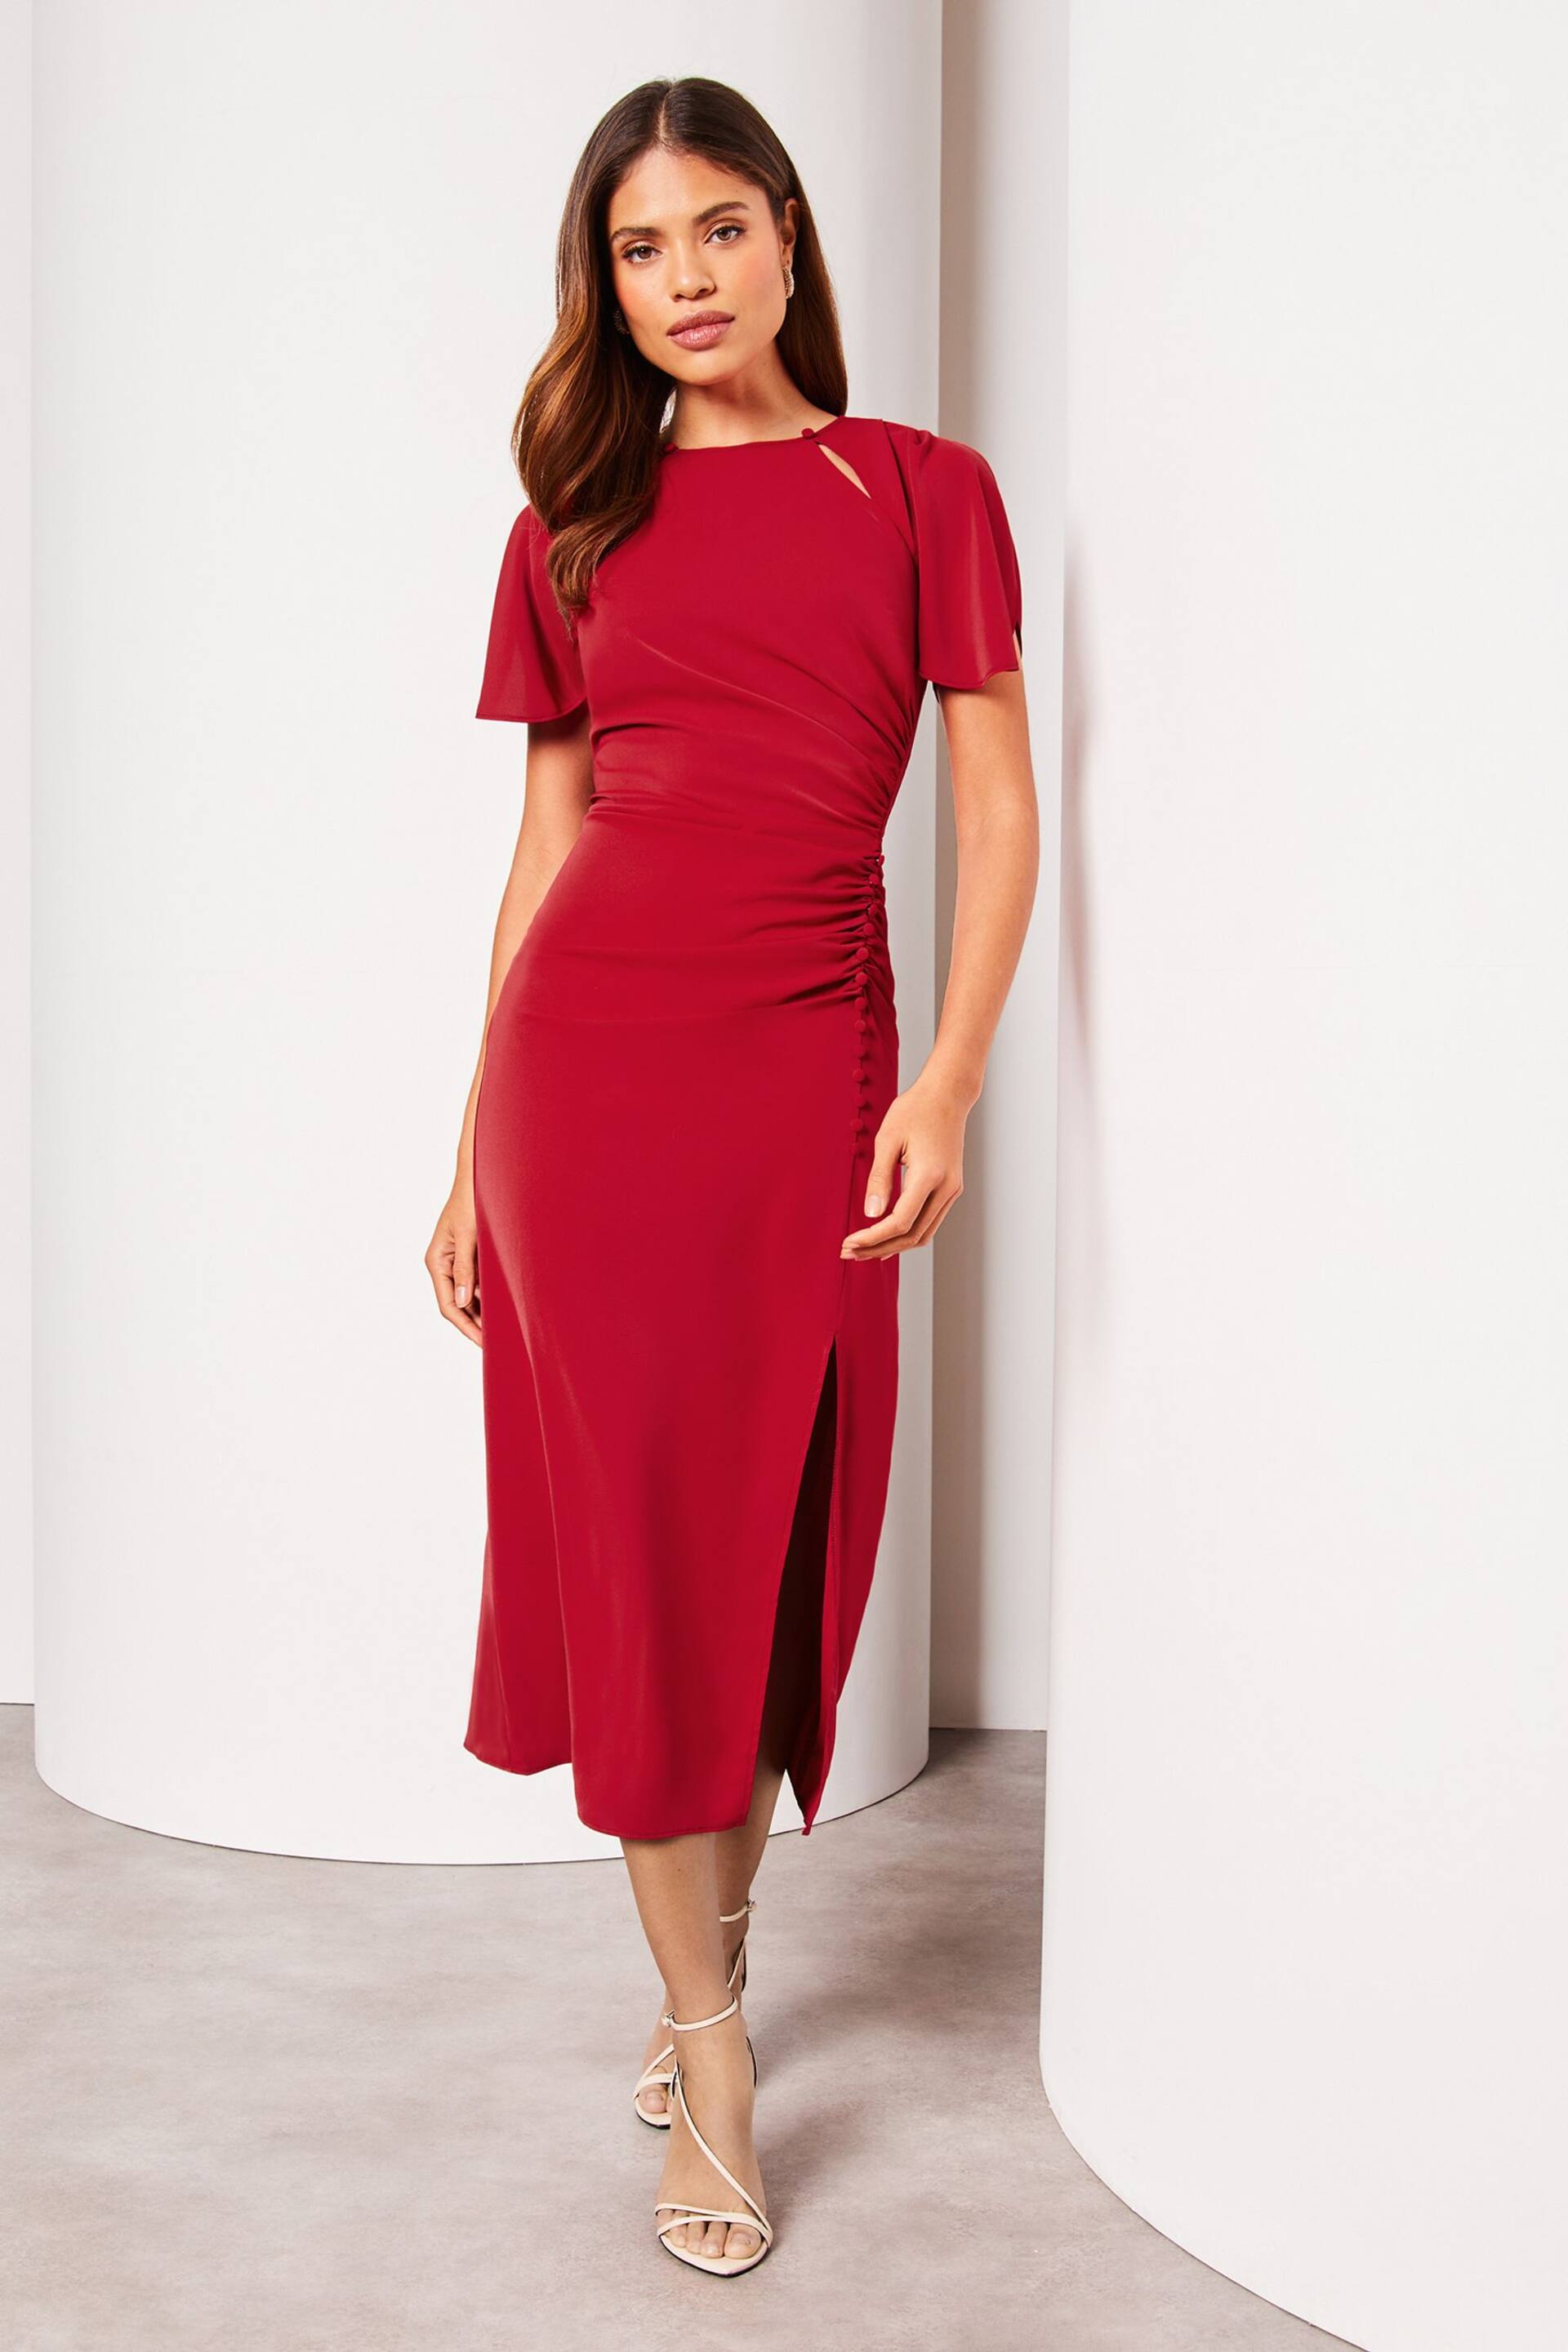 Lipsy Red Ruched Button Front Sleeved Midi Dress - Image 1 of 4